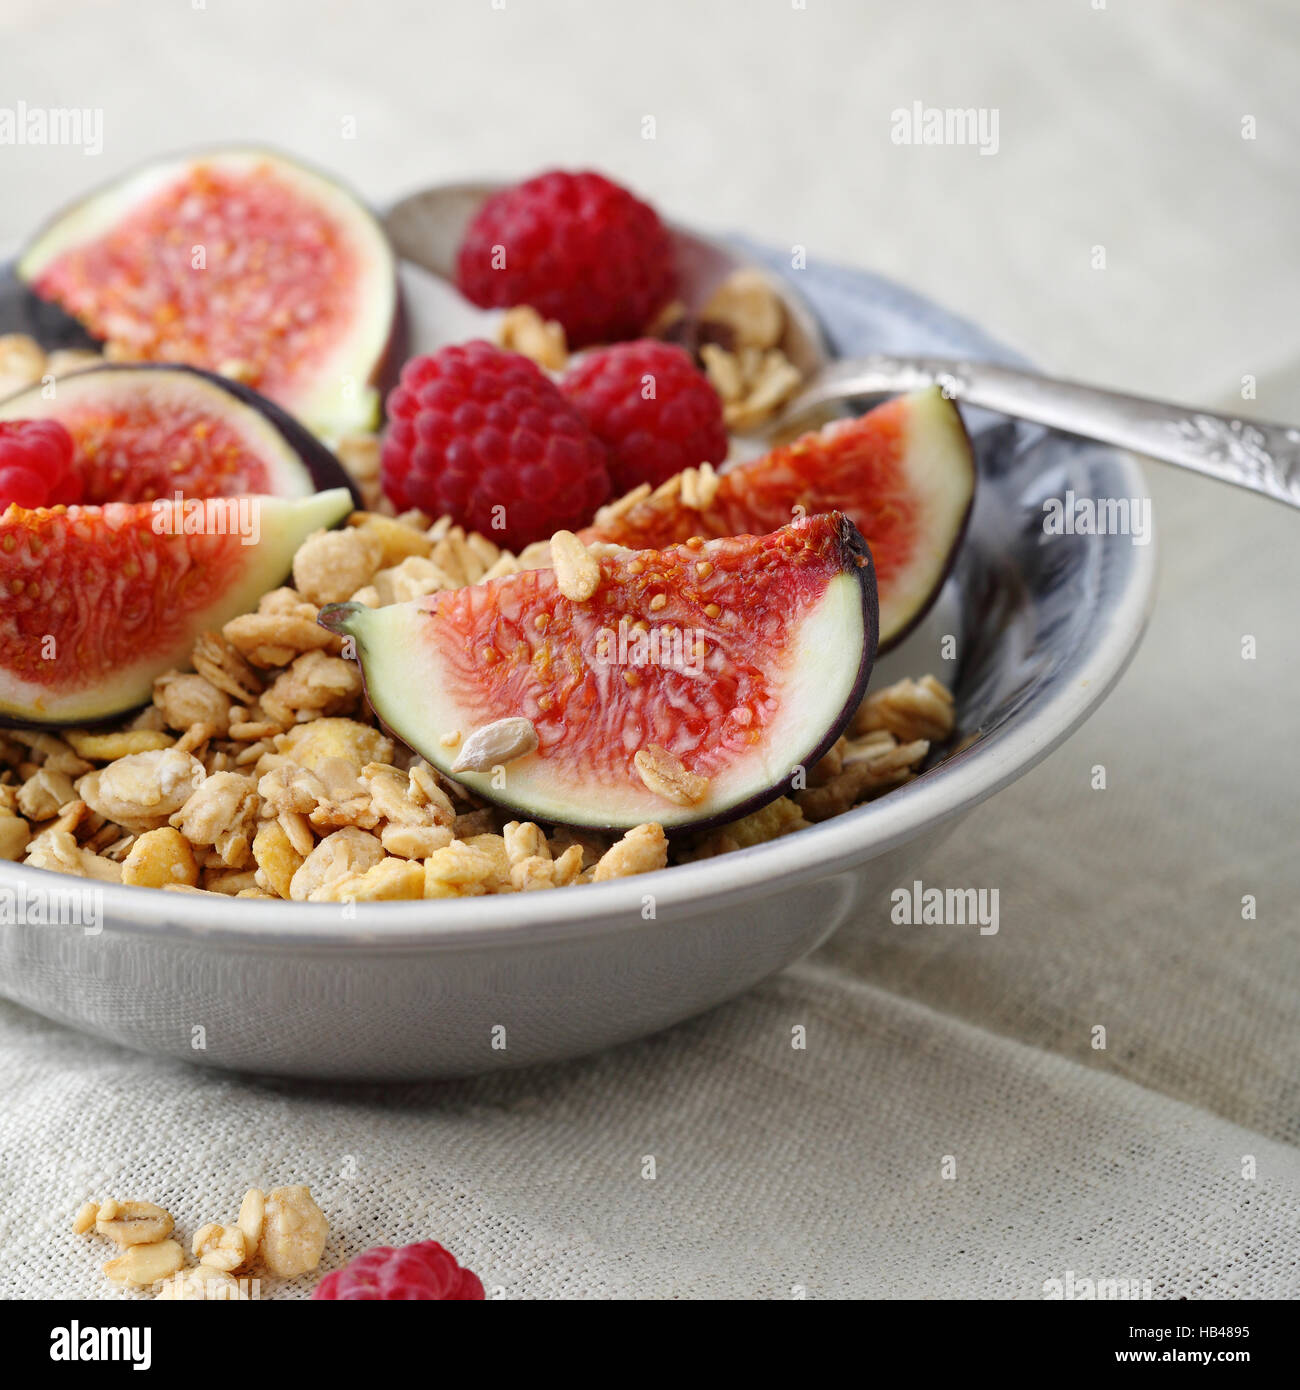 breakfast bowl with fruits, healthy eating Stock Photo